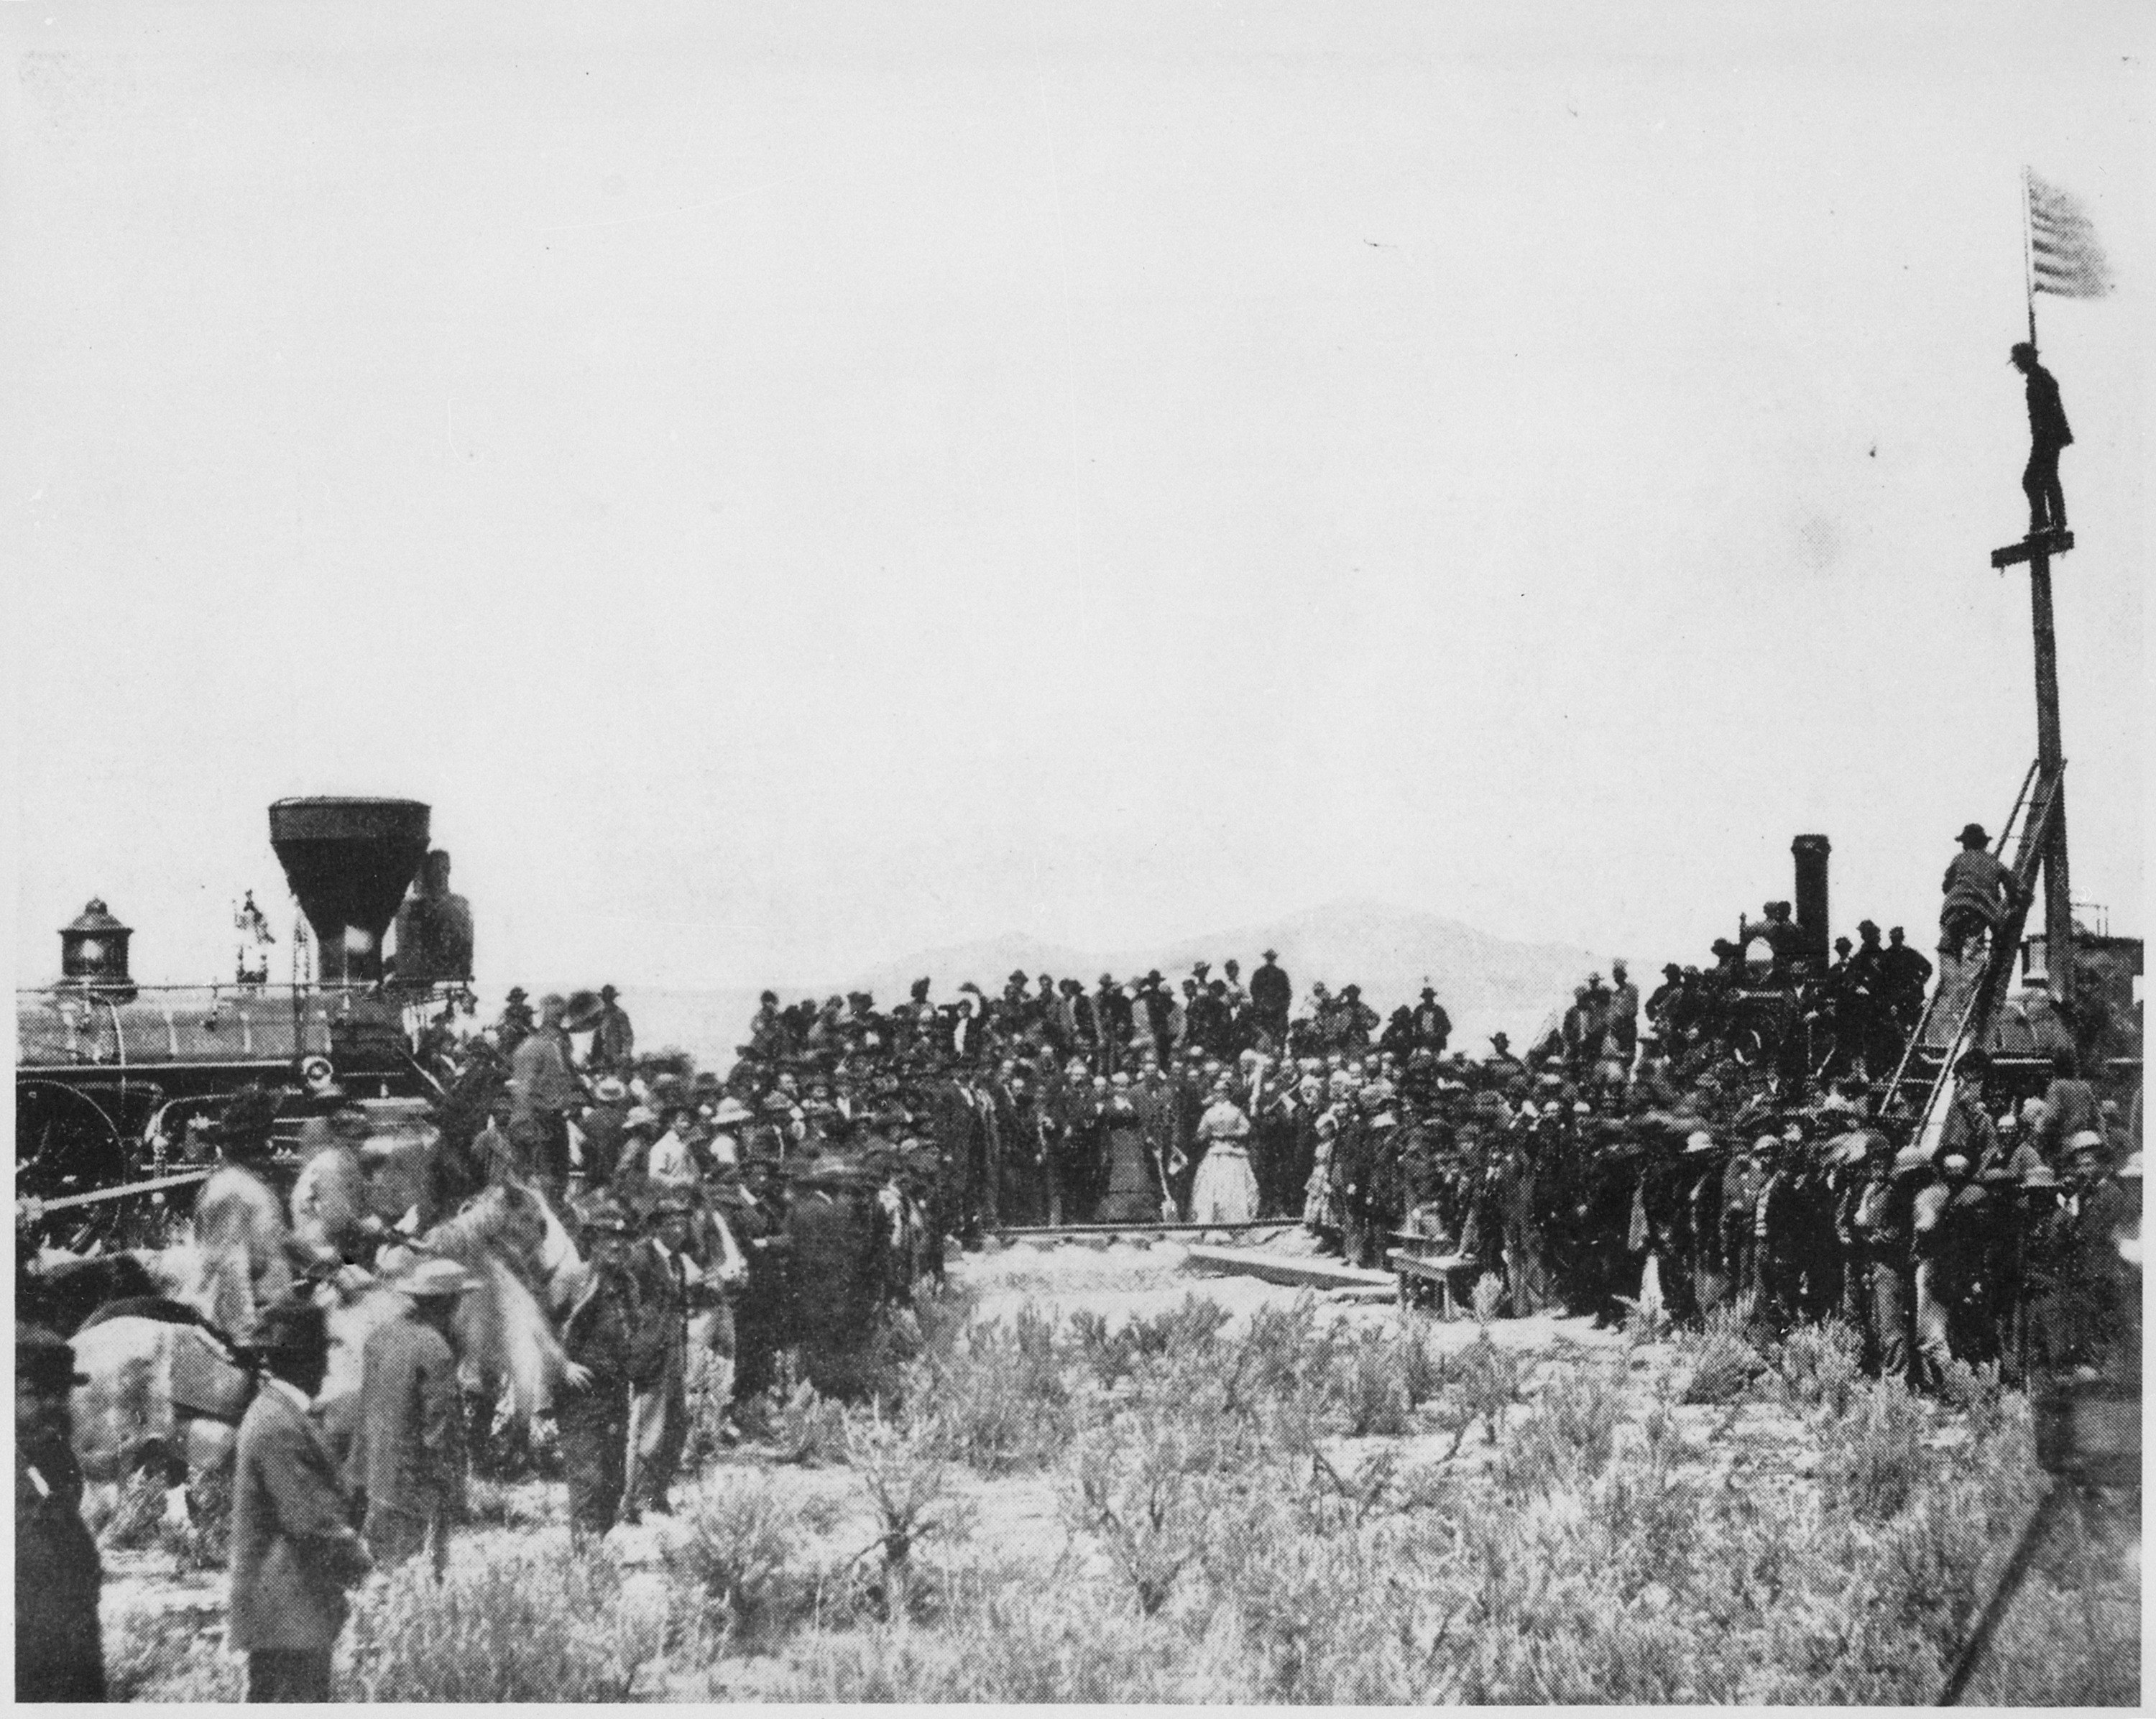 Joining_the_tracks_for_the_first_transcontinental_railroad_Promontory_Utah_Terr._1869_-_NARA_-_5133413.jpg#asset:1742